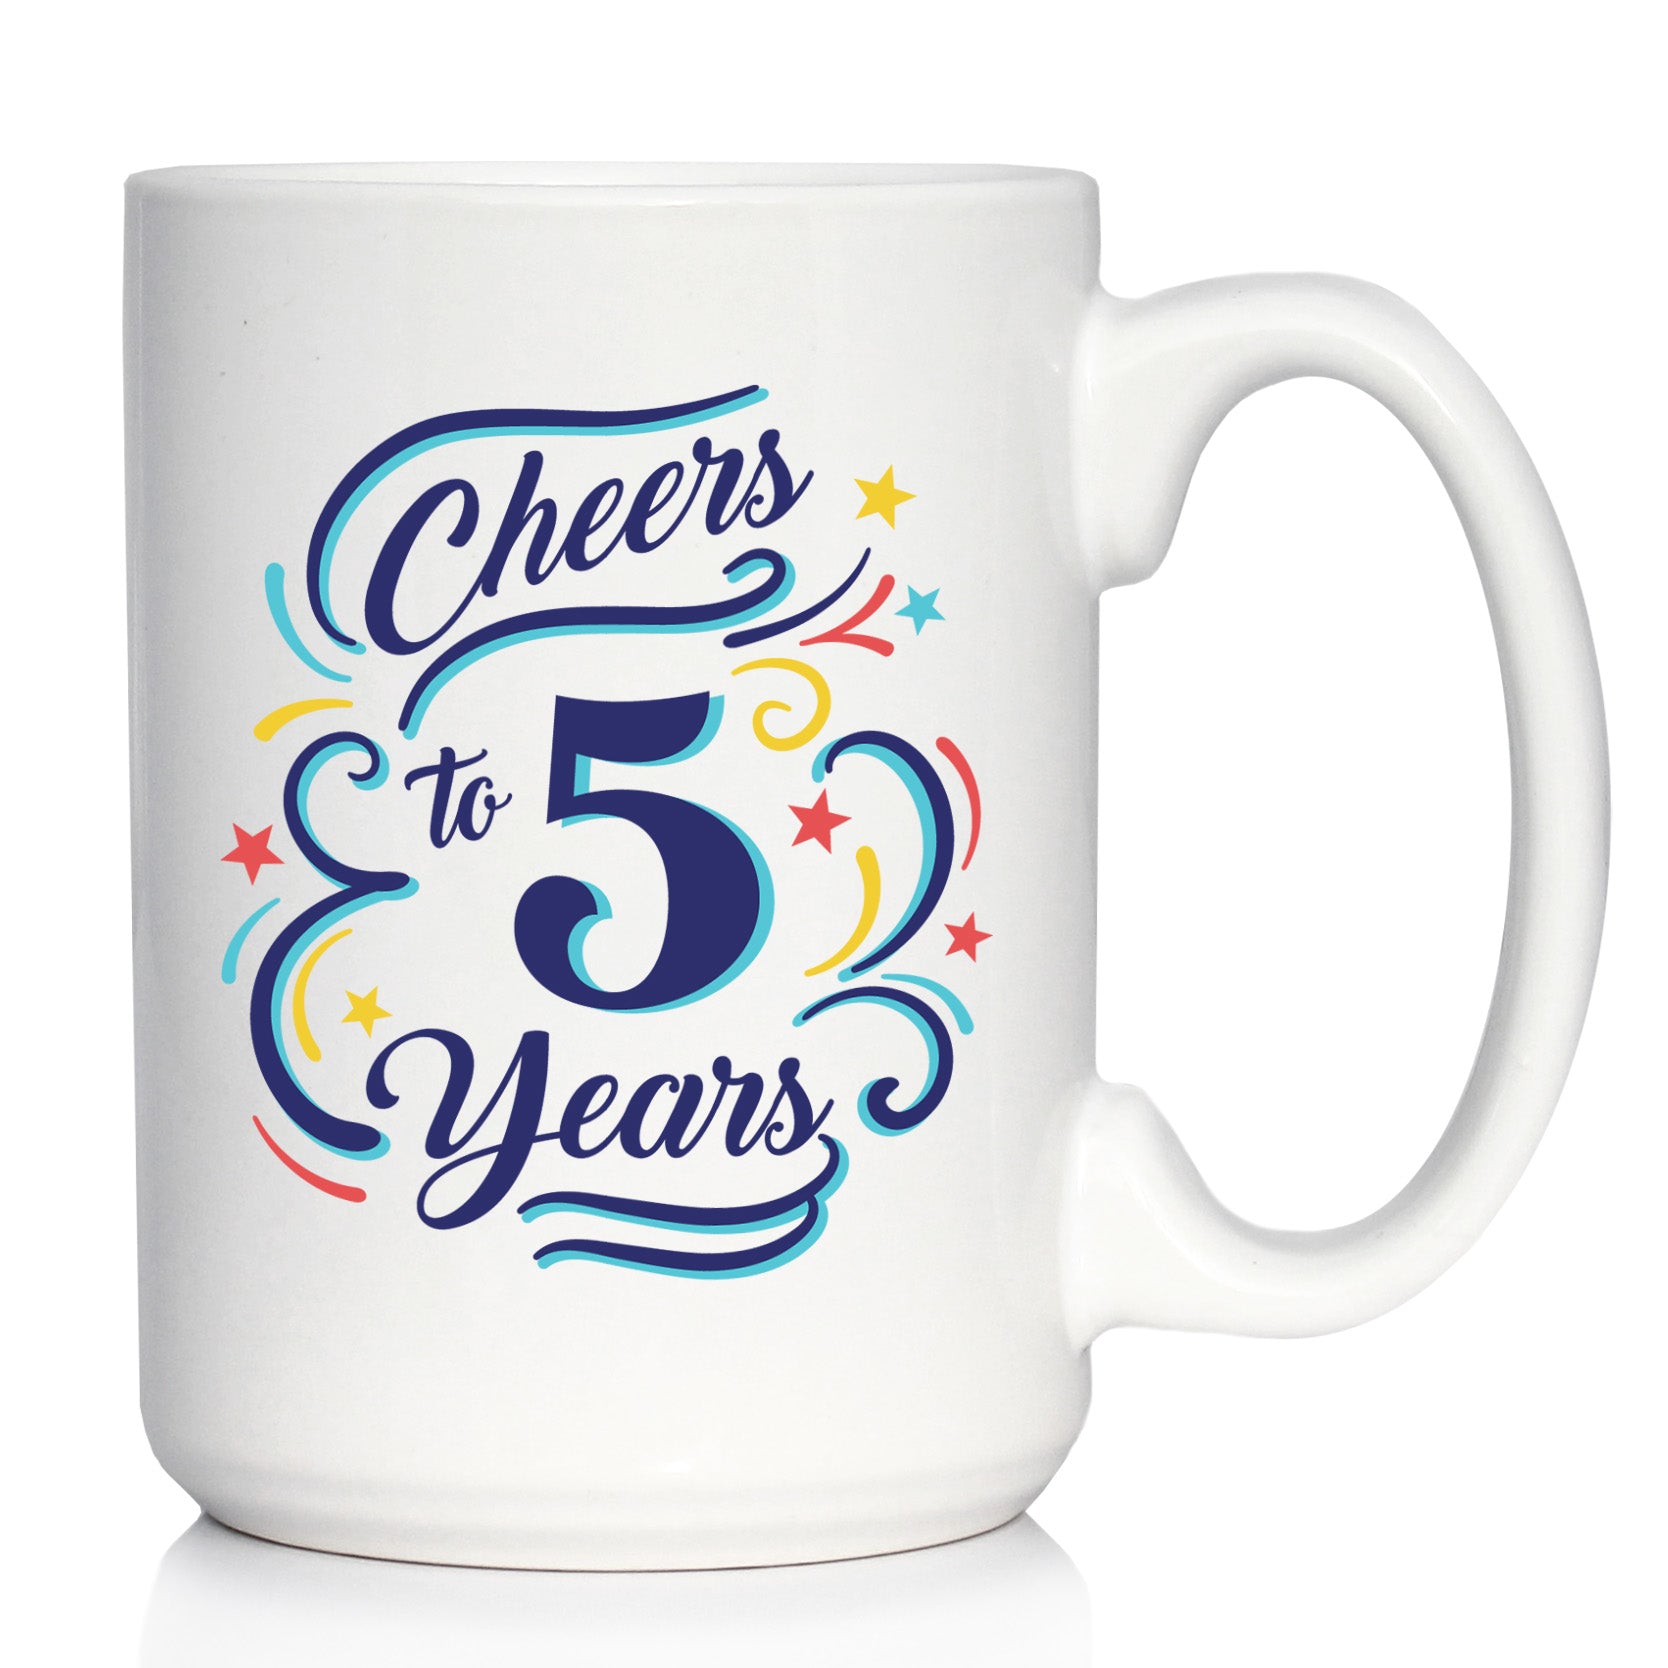 Cheers to 5 Years - Coffee Mug Gifts for Women & Men - 5th Anniversary Party Decor